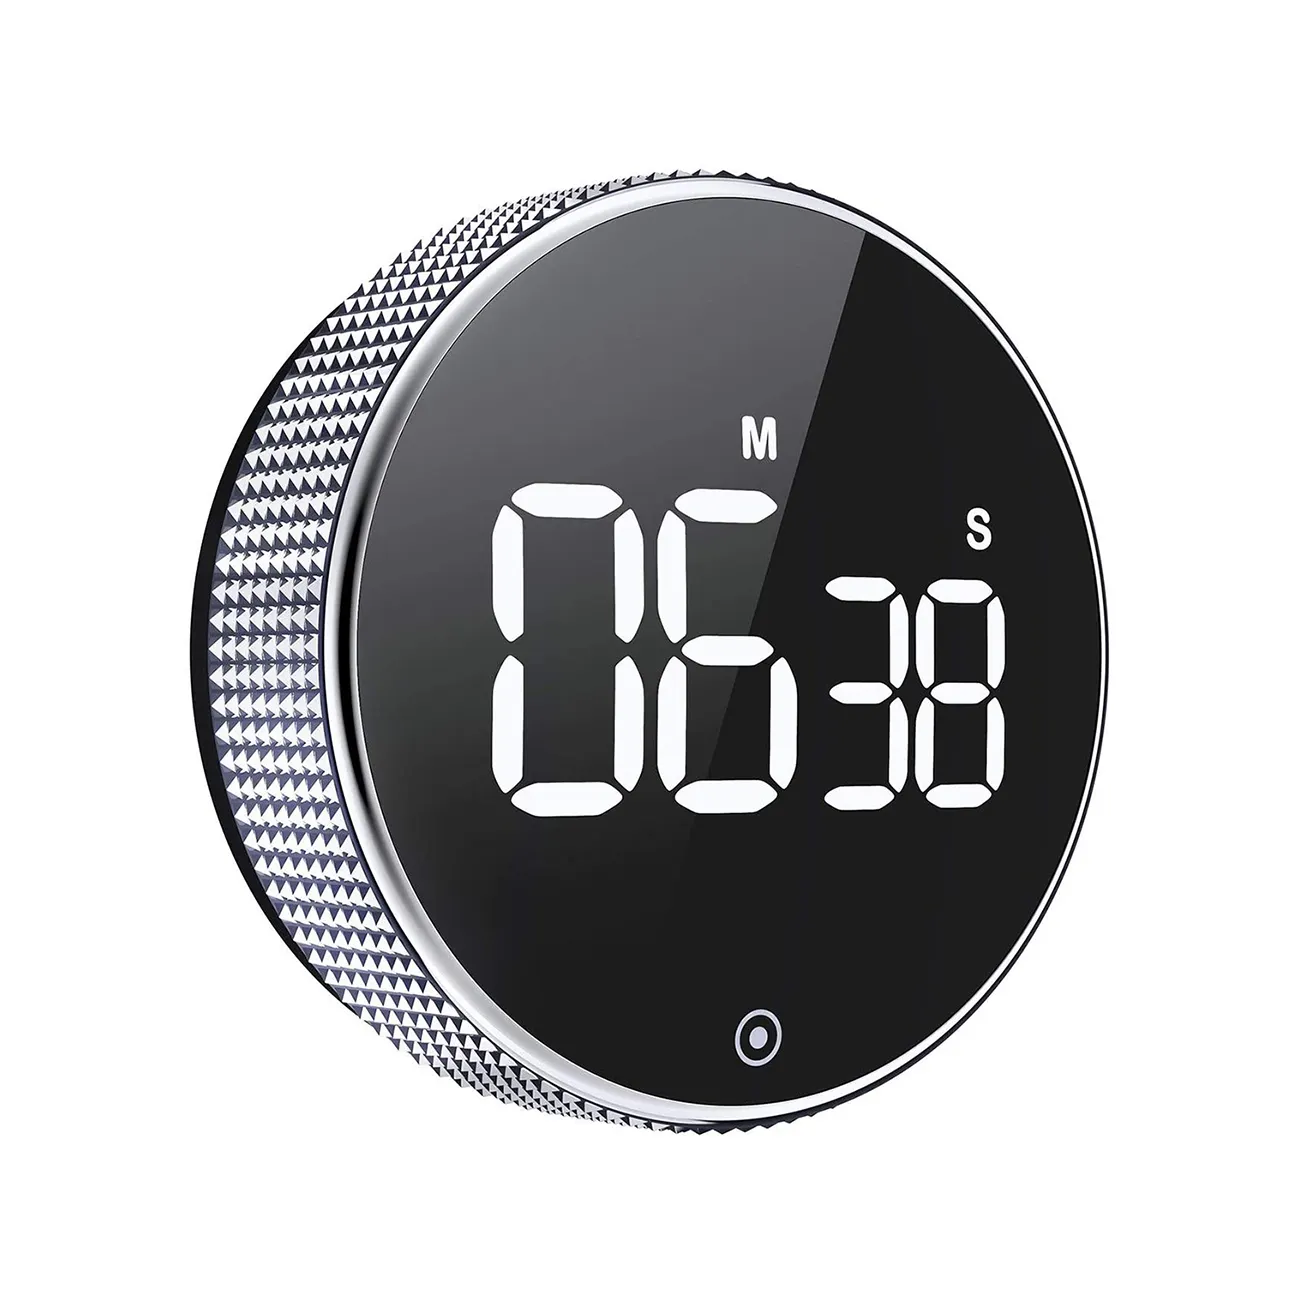 NEW Arrival Circular Knob Loud Digital Kitchen Countdown Timer Magnetic LCD Large Display Countdown Timer